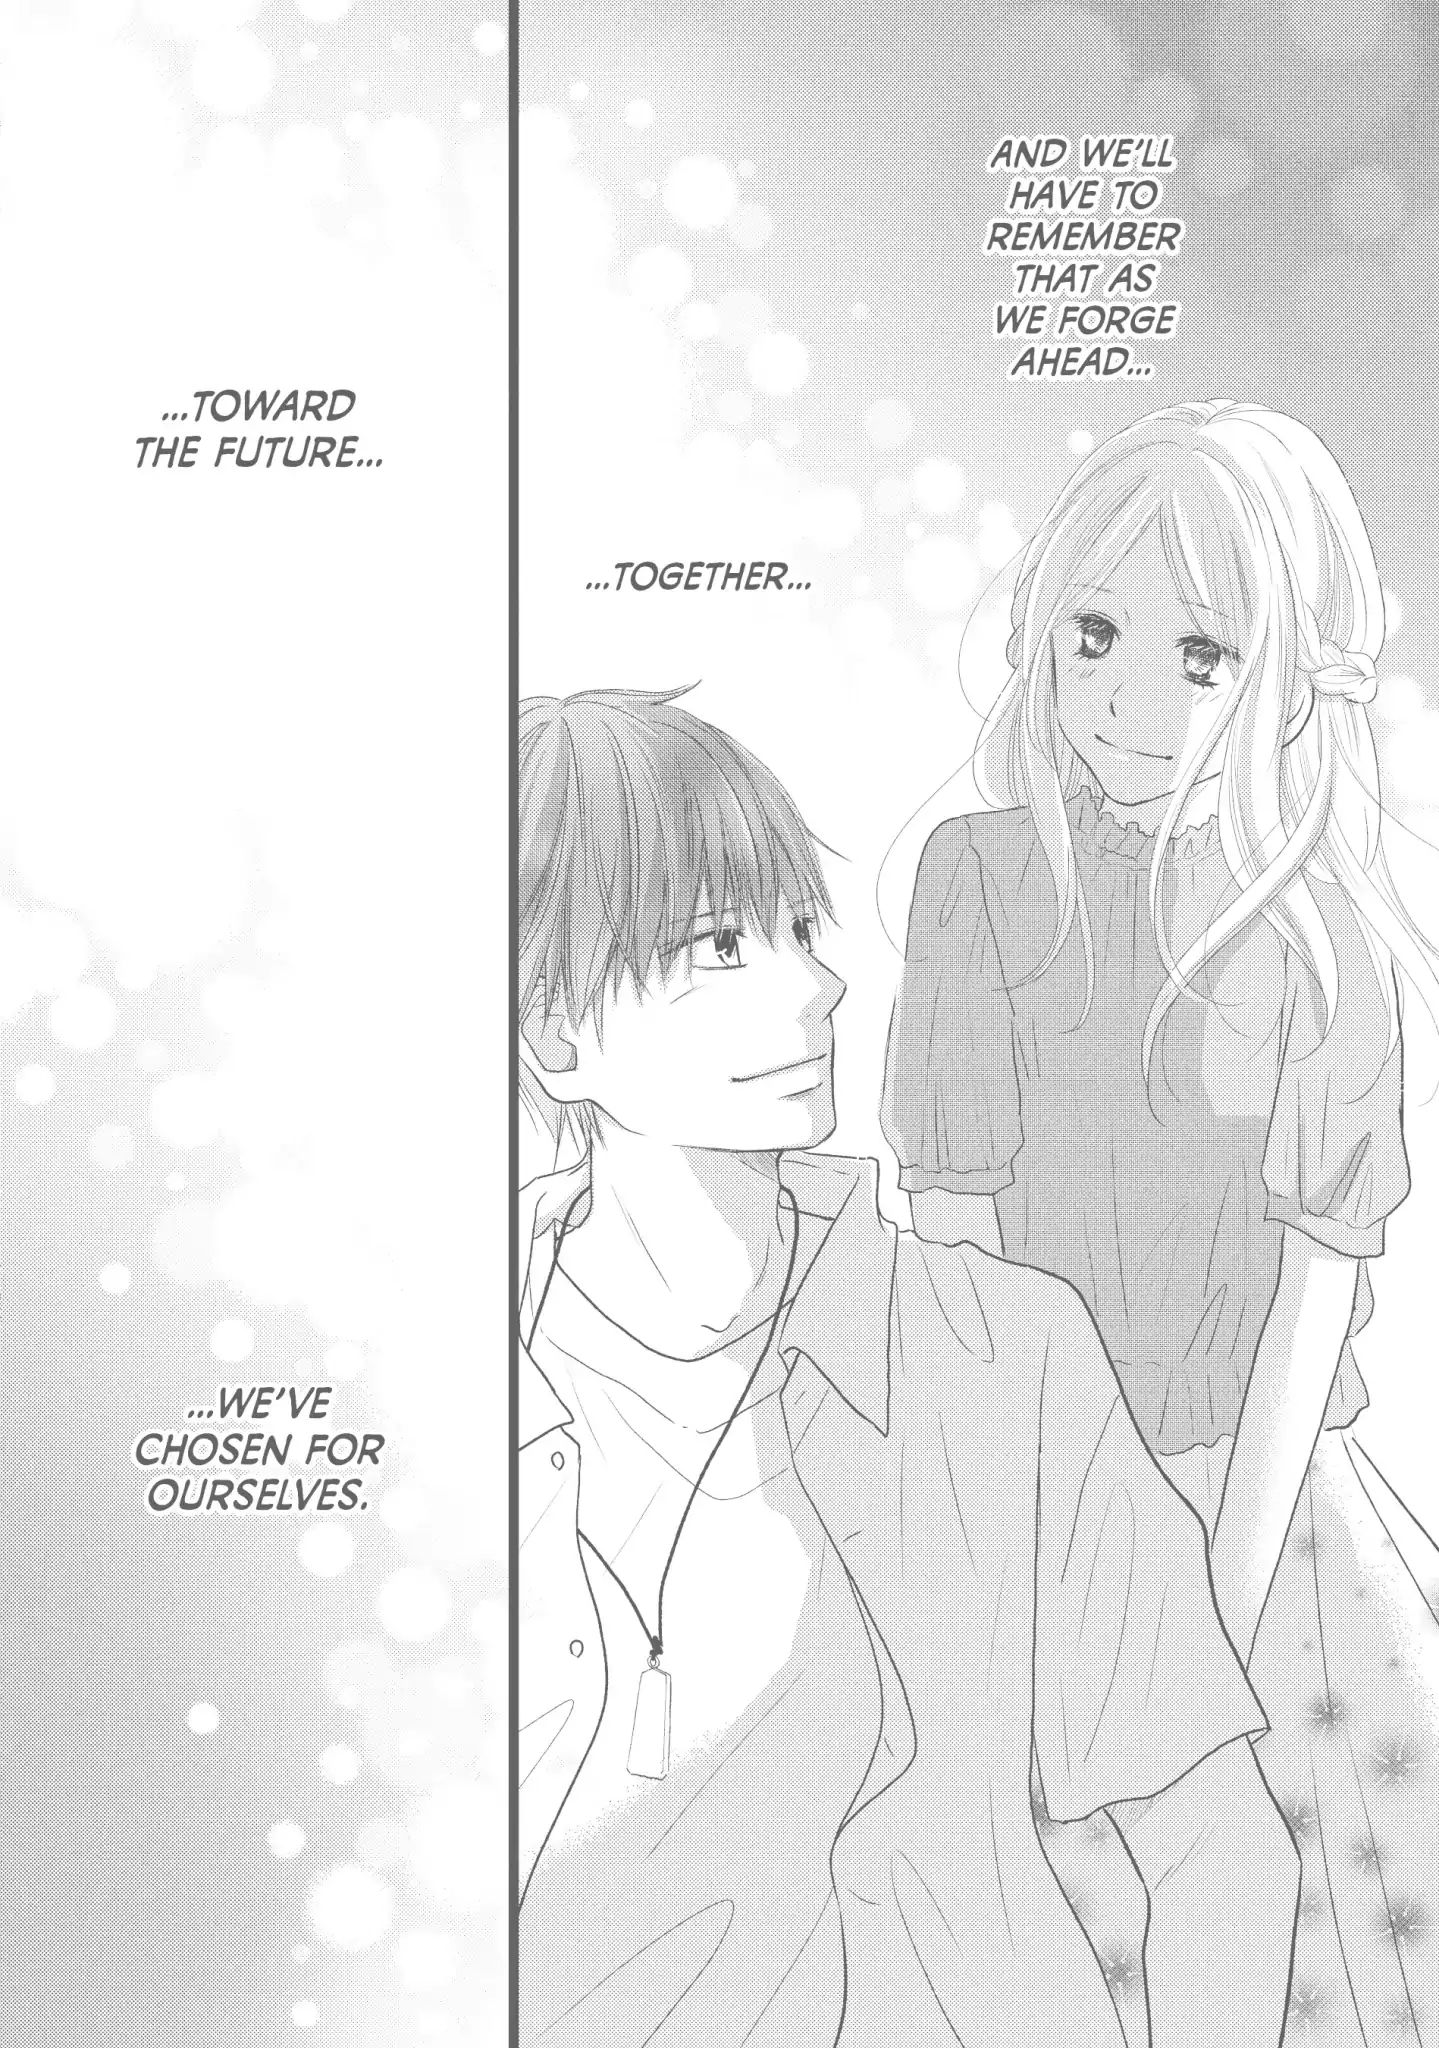 Perfect World (ARUGA Rie) Vol.9 Chapter 44: On A Sunny Day, Cherry Petals Dancing All Around